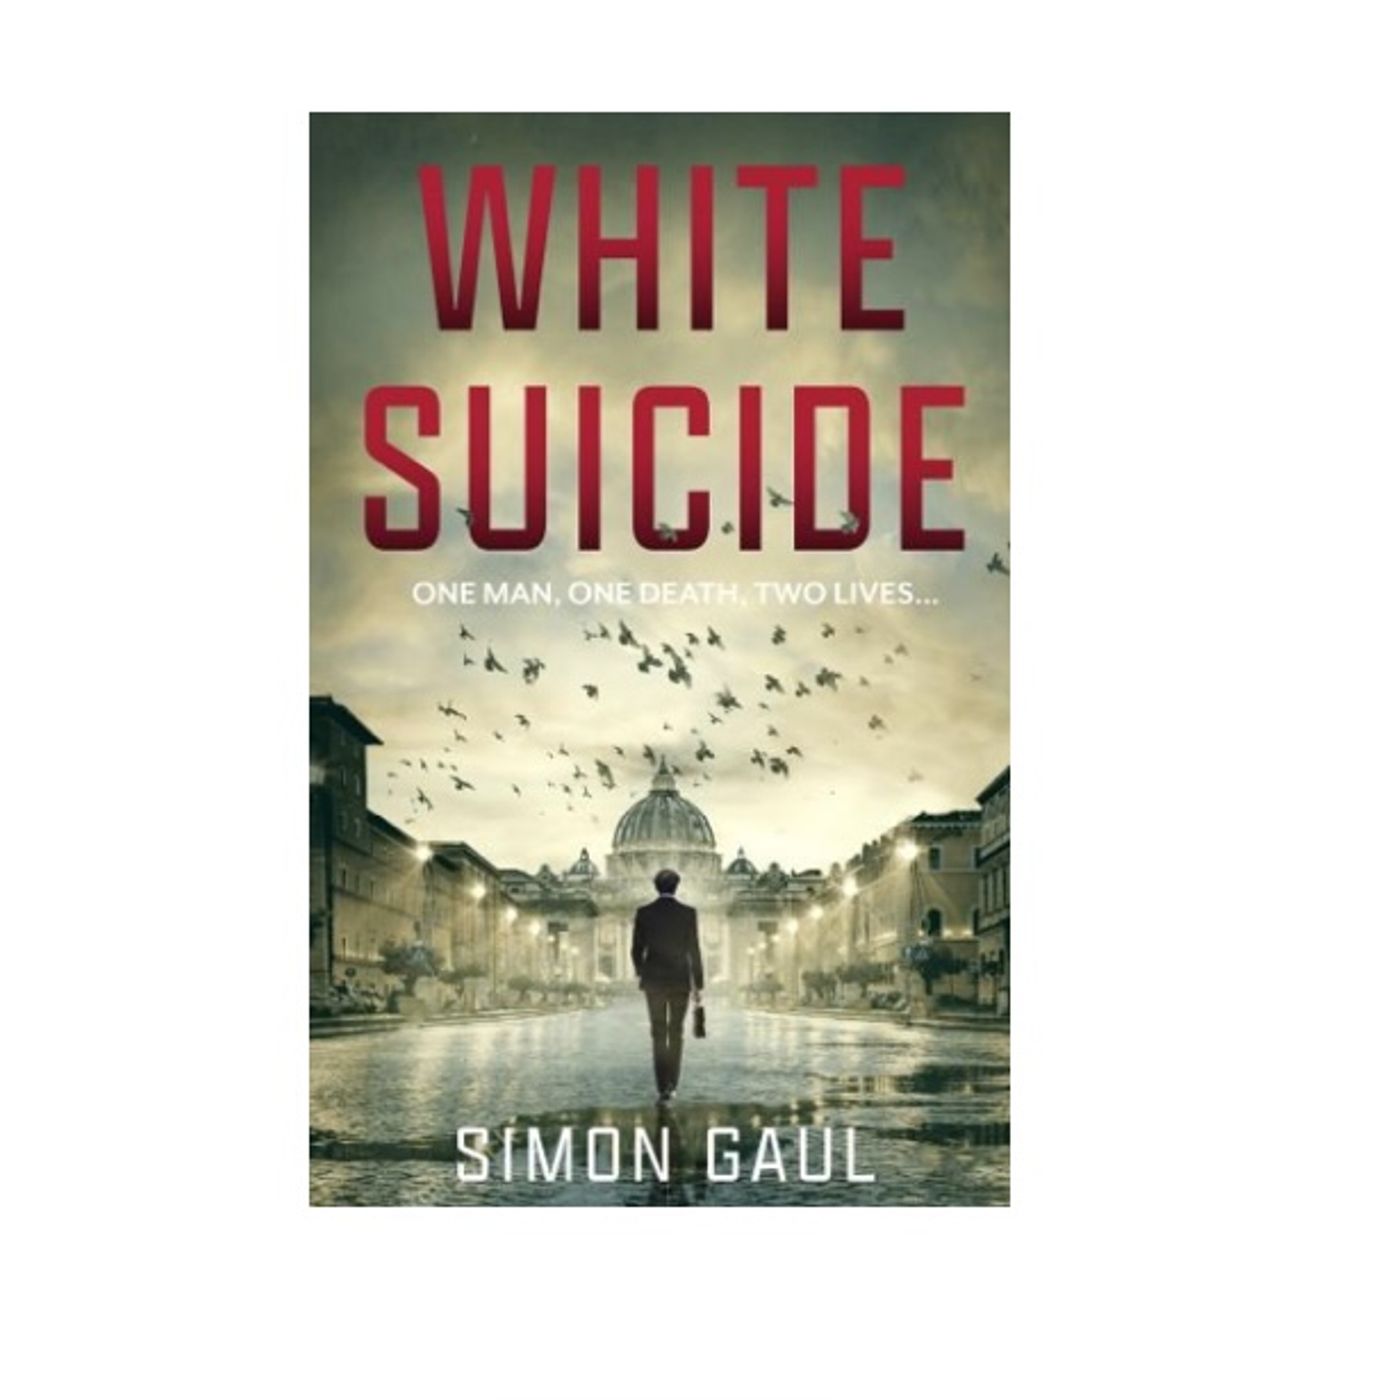 Interview on the Aldo Moro Affair with Simon Gaul, Author of "White Suicide"